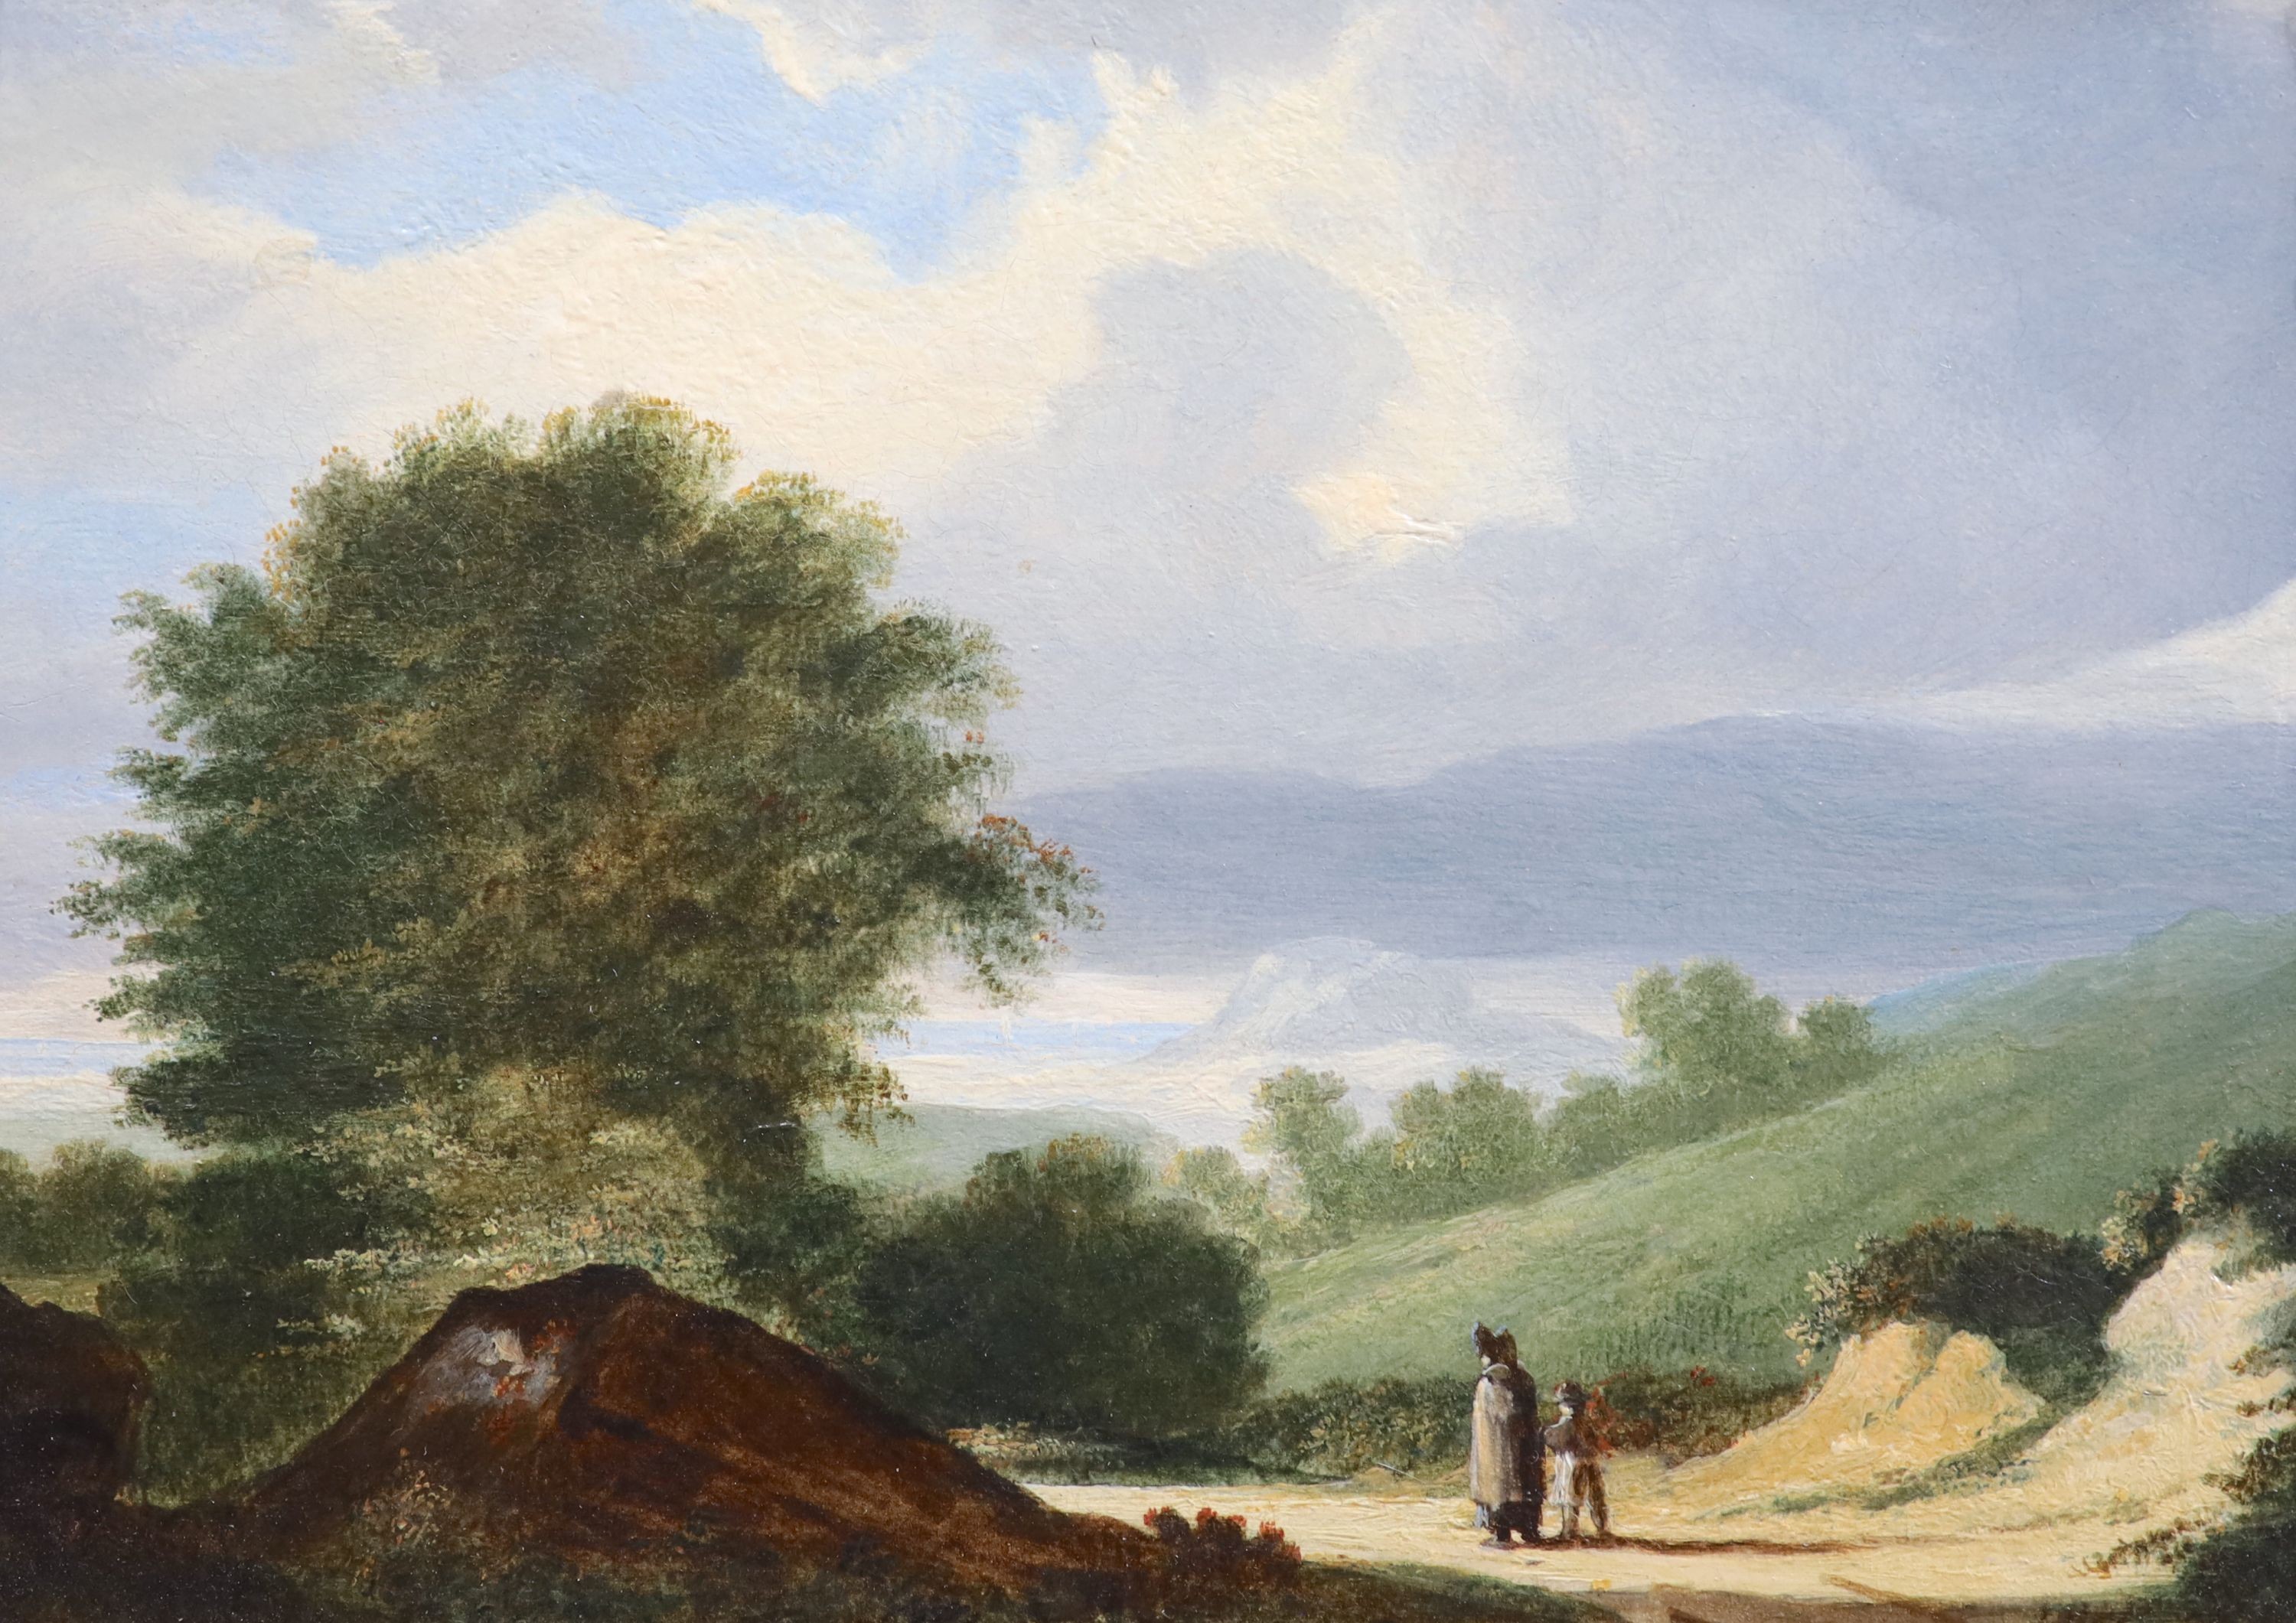 James Arthur O’Connor (Irish, 1792-1841), Travellers in landscapes, Oil on wooden panel, a pair, 14 x 19cm.